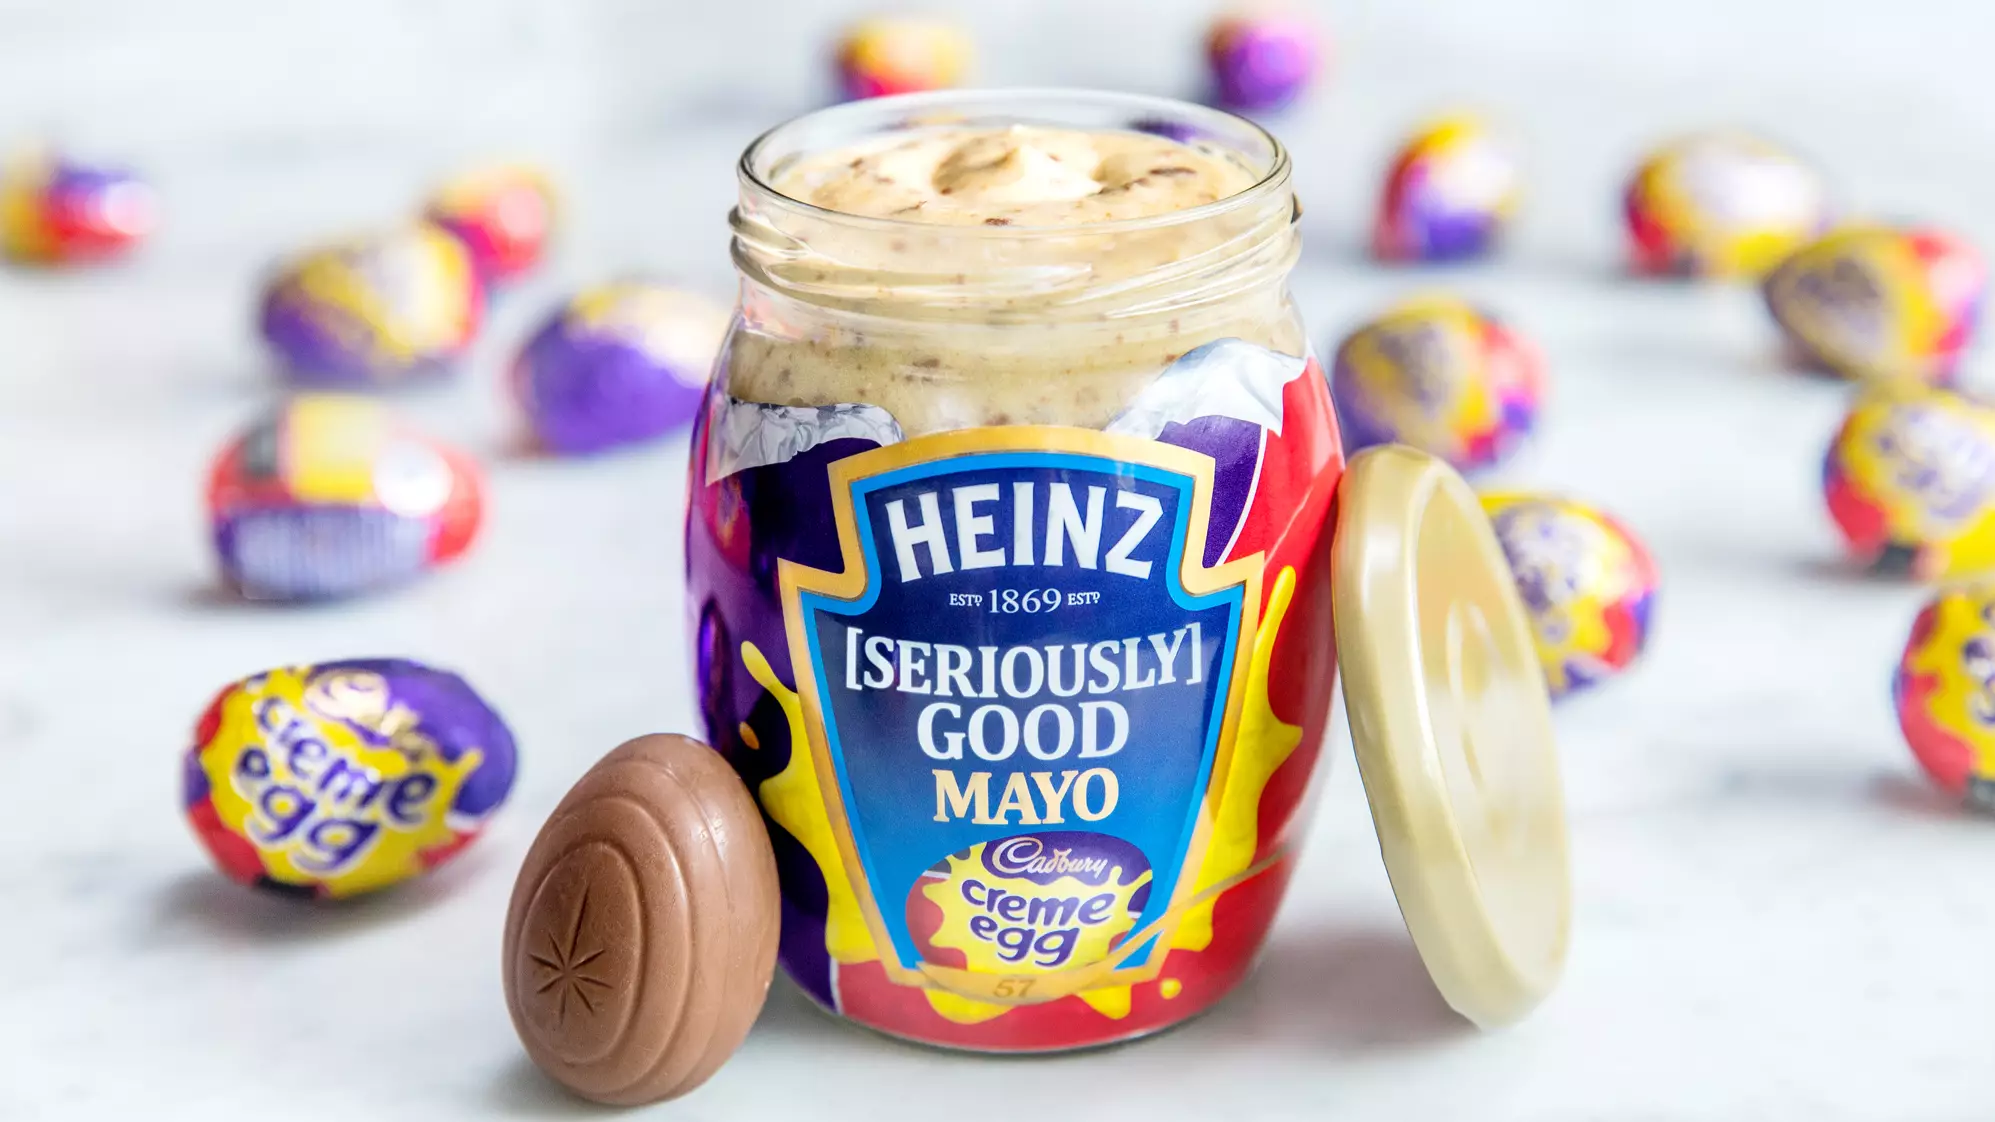 Heinz  Creme Egg Mayo Wasn't An April Fool's Prank - Here's where You Can Try It